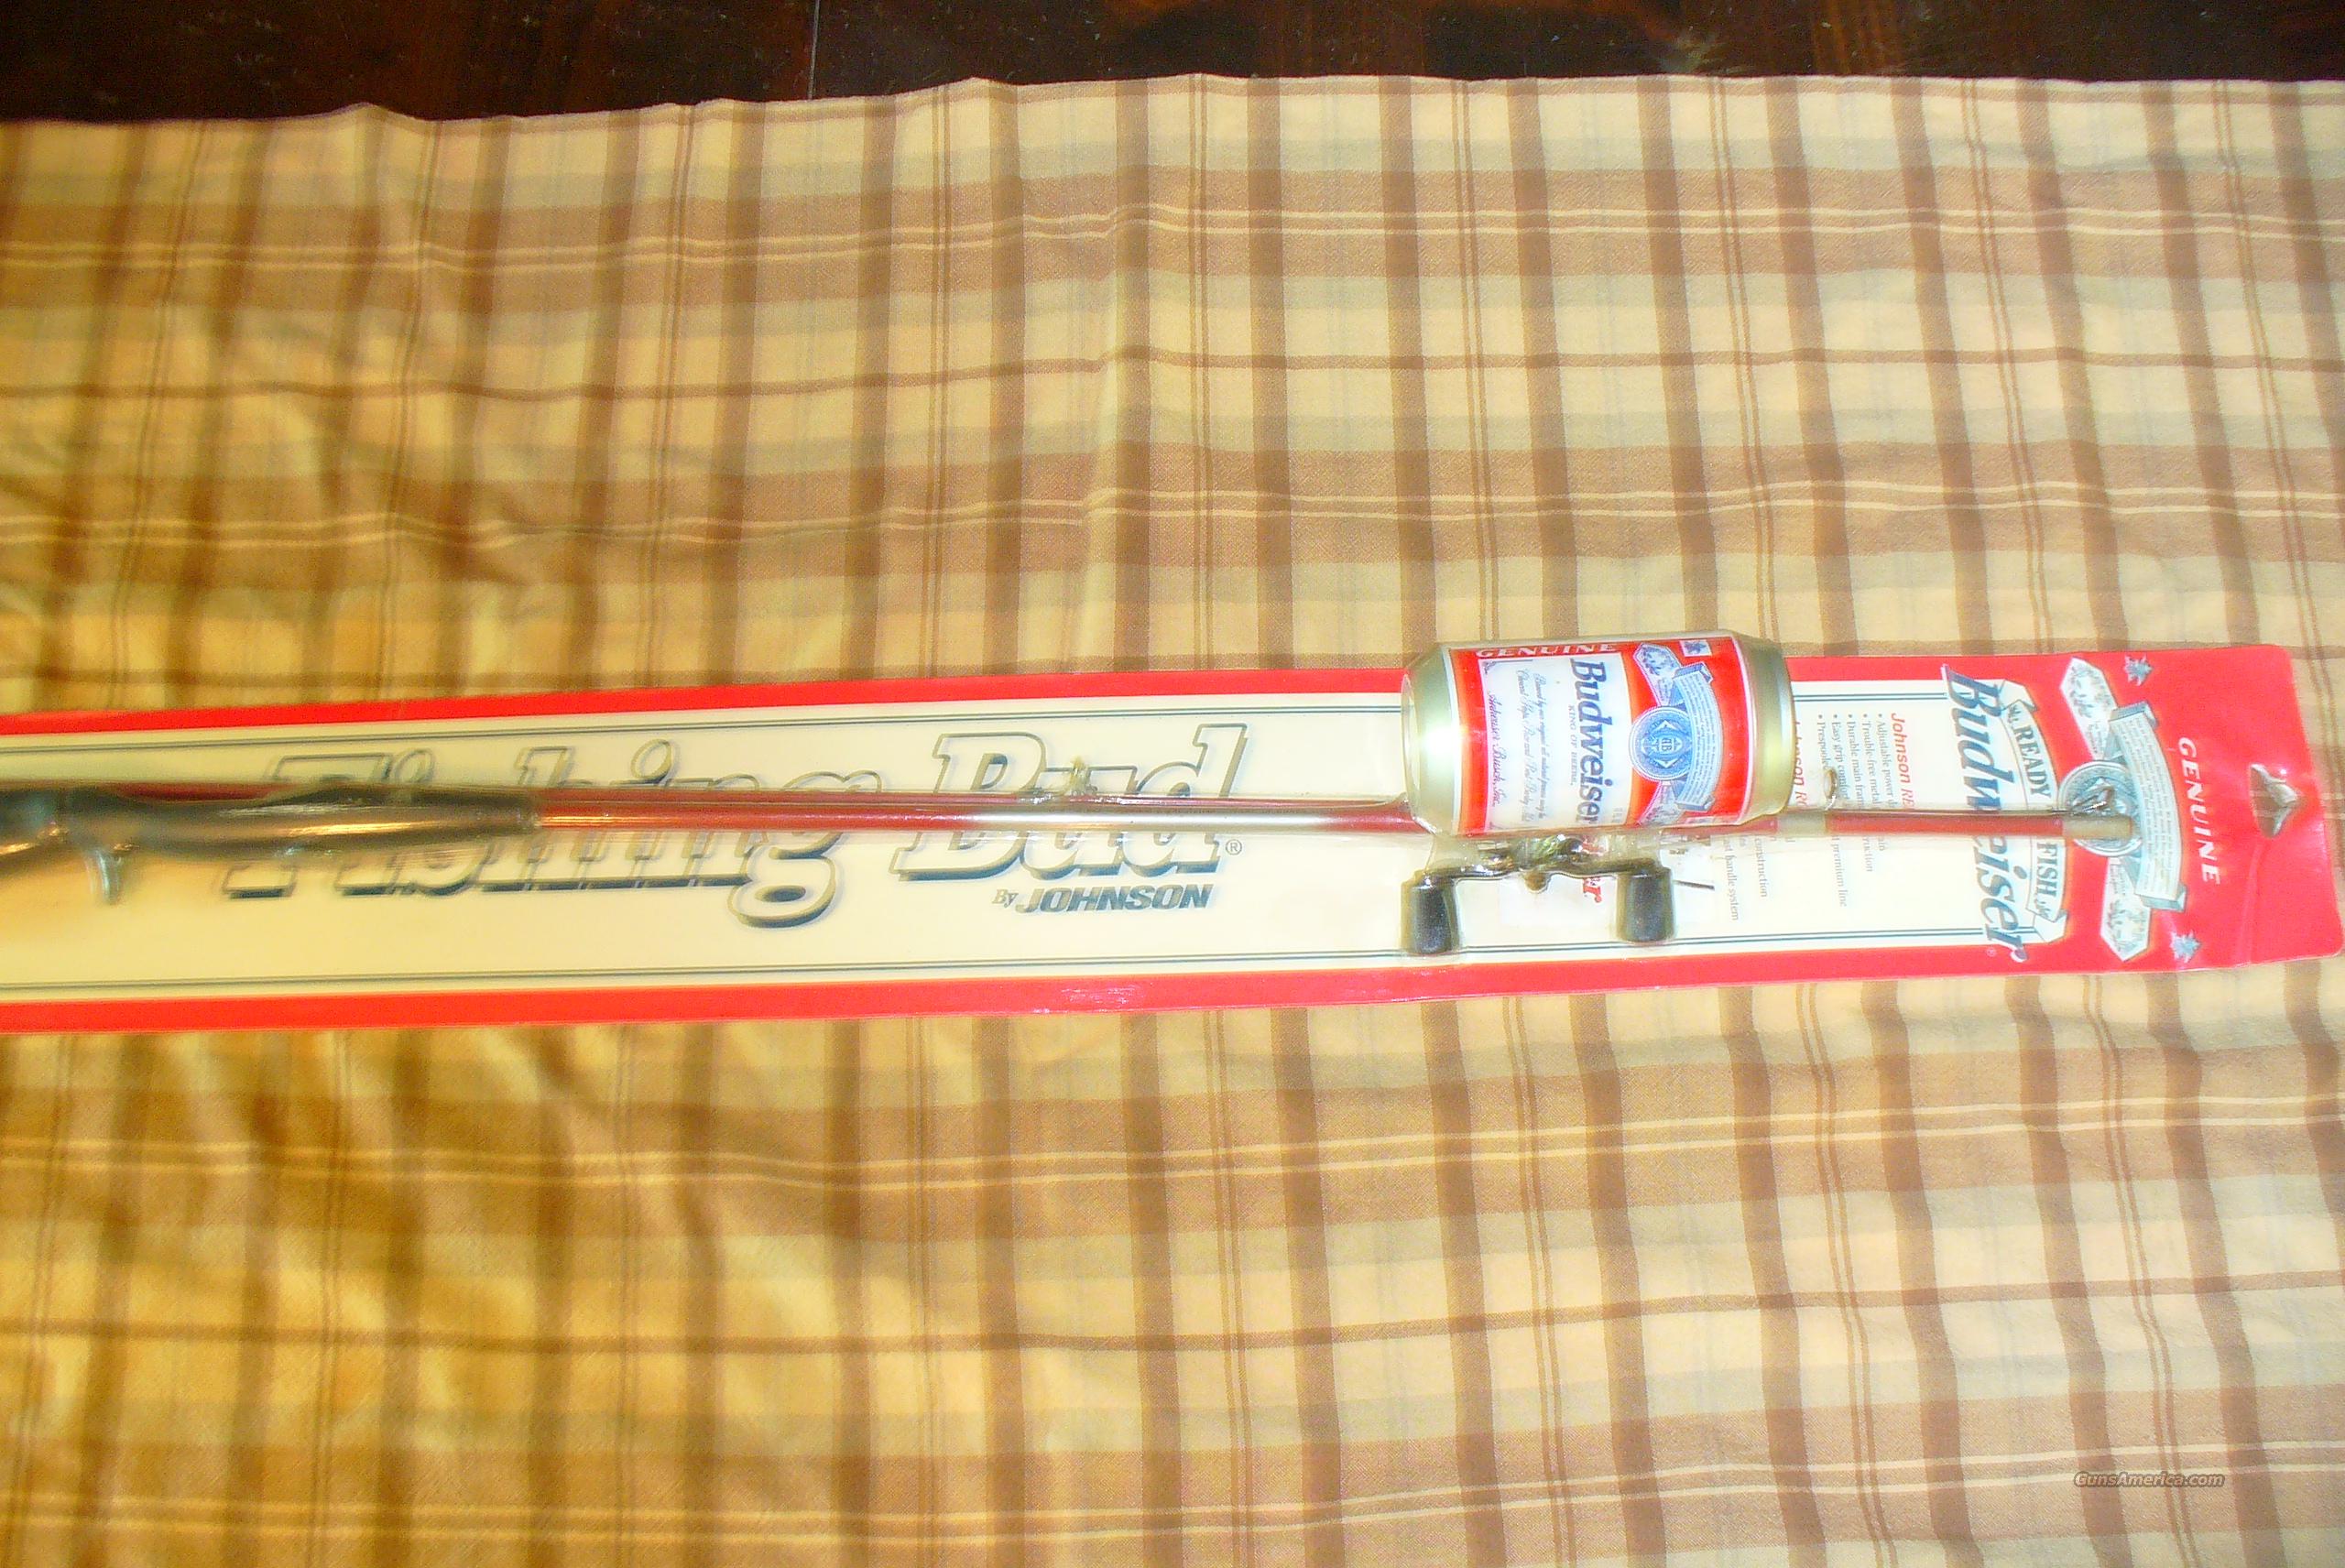 Budweiser Fishing Rod and Reel for sale at : 942261704